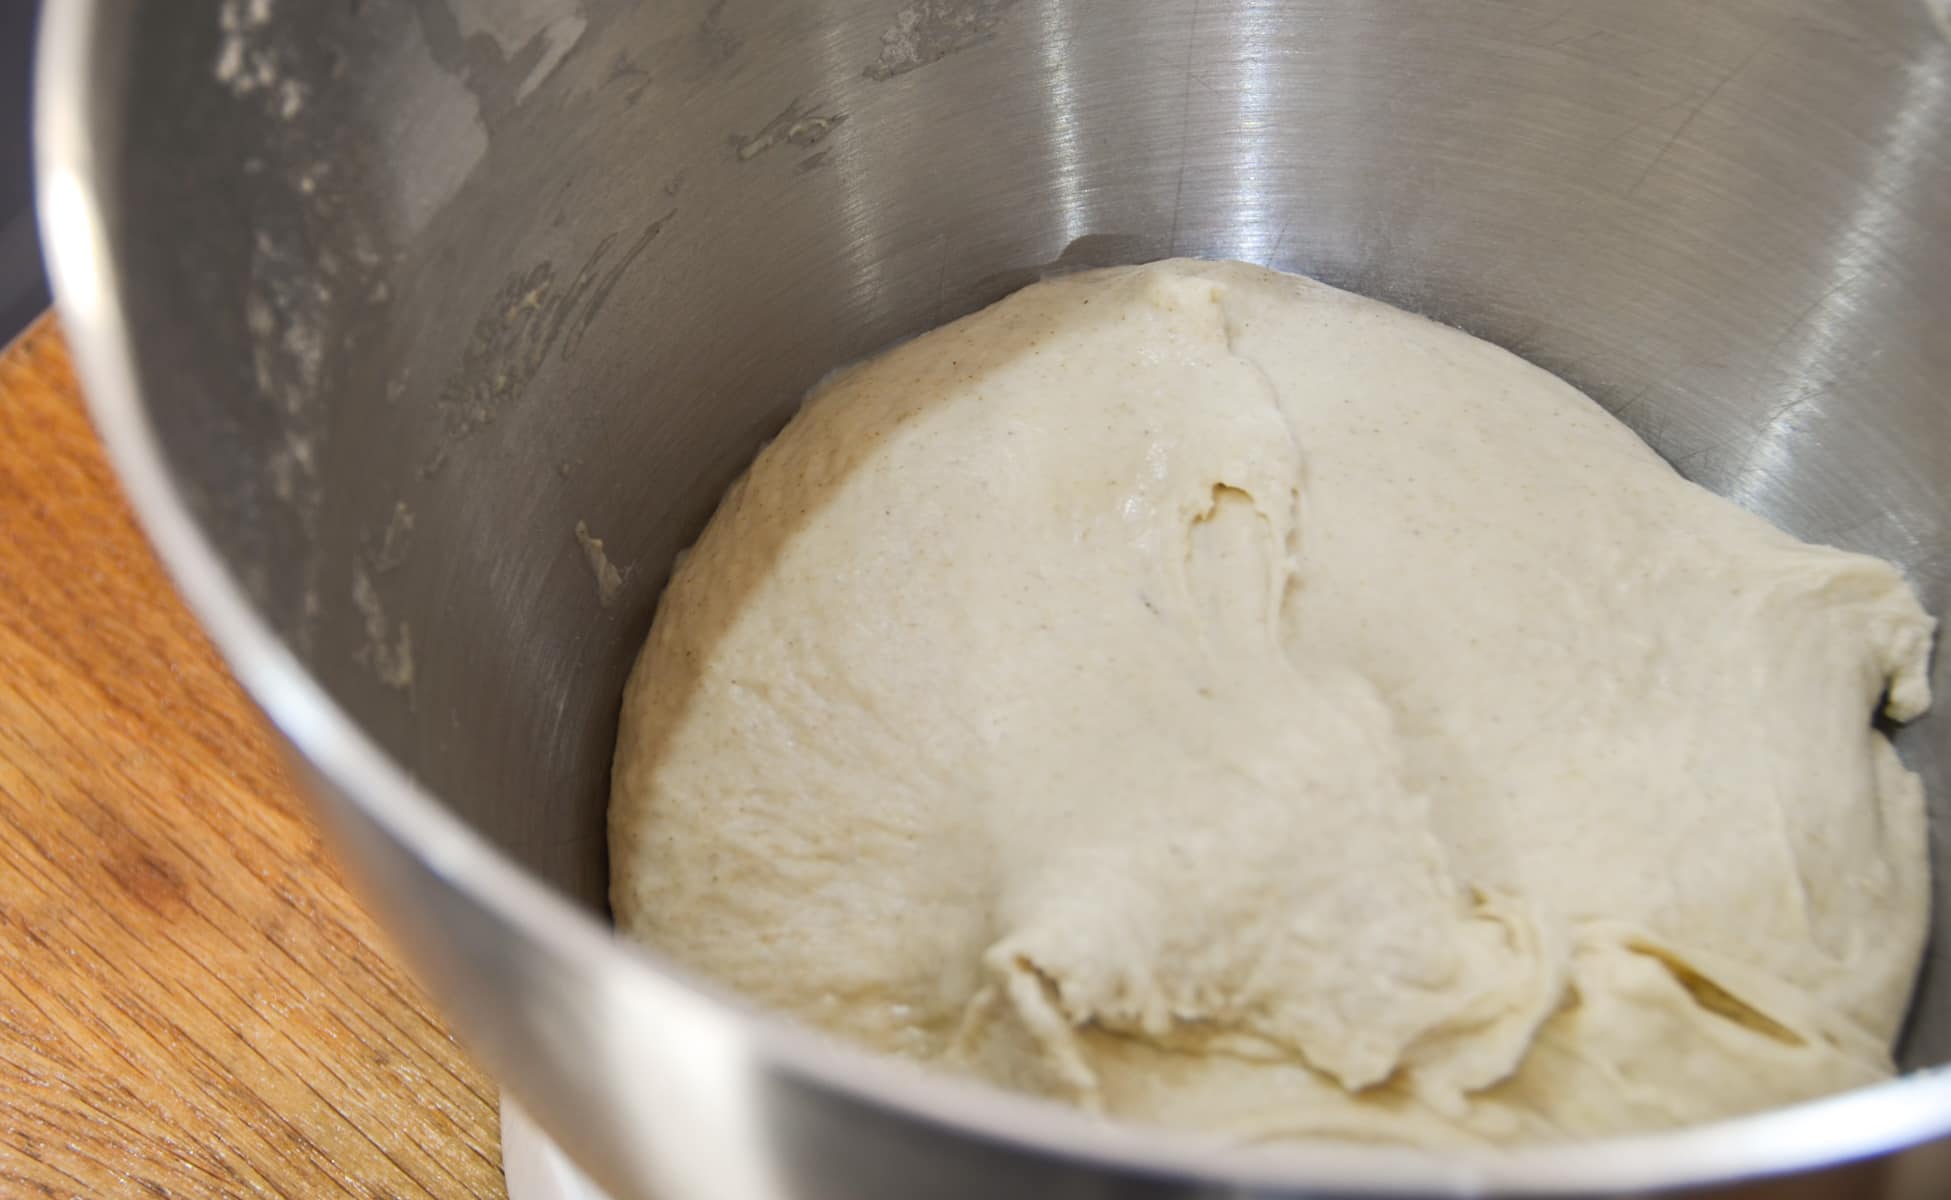 A dough made in a stand mixer ready to rise before using.